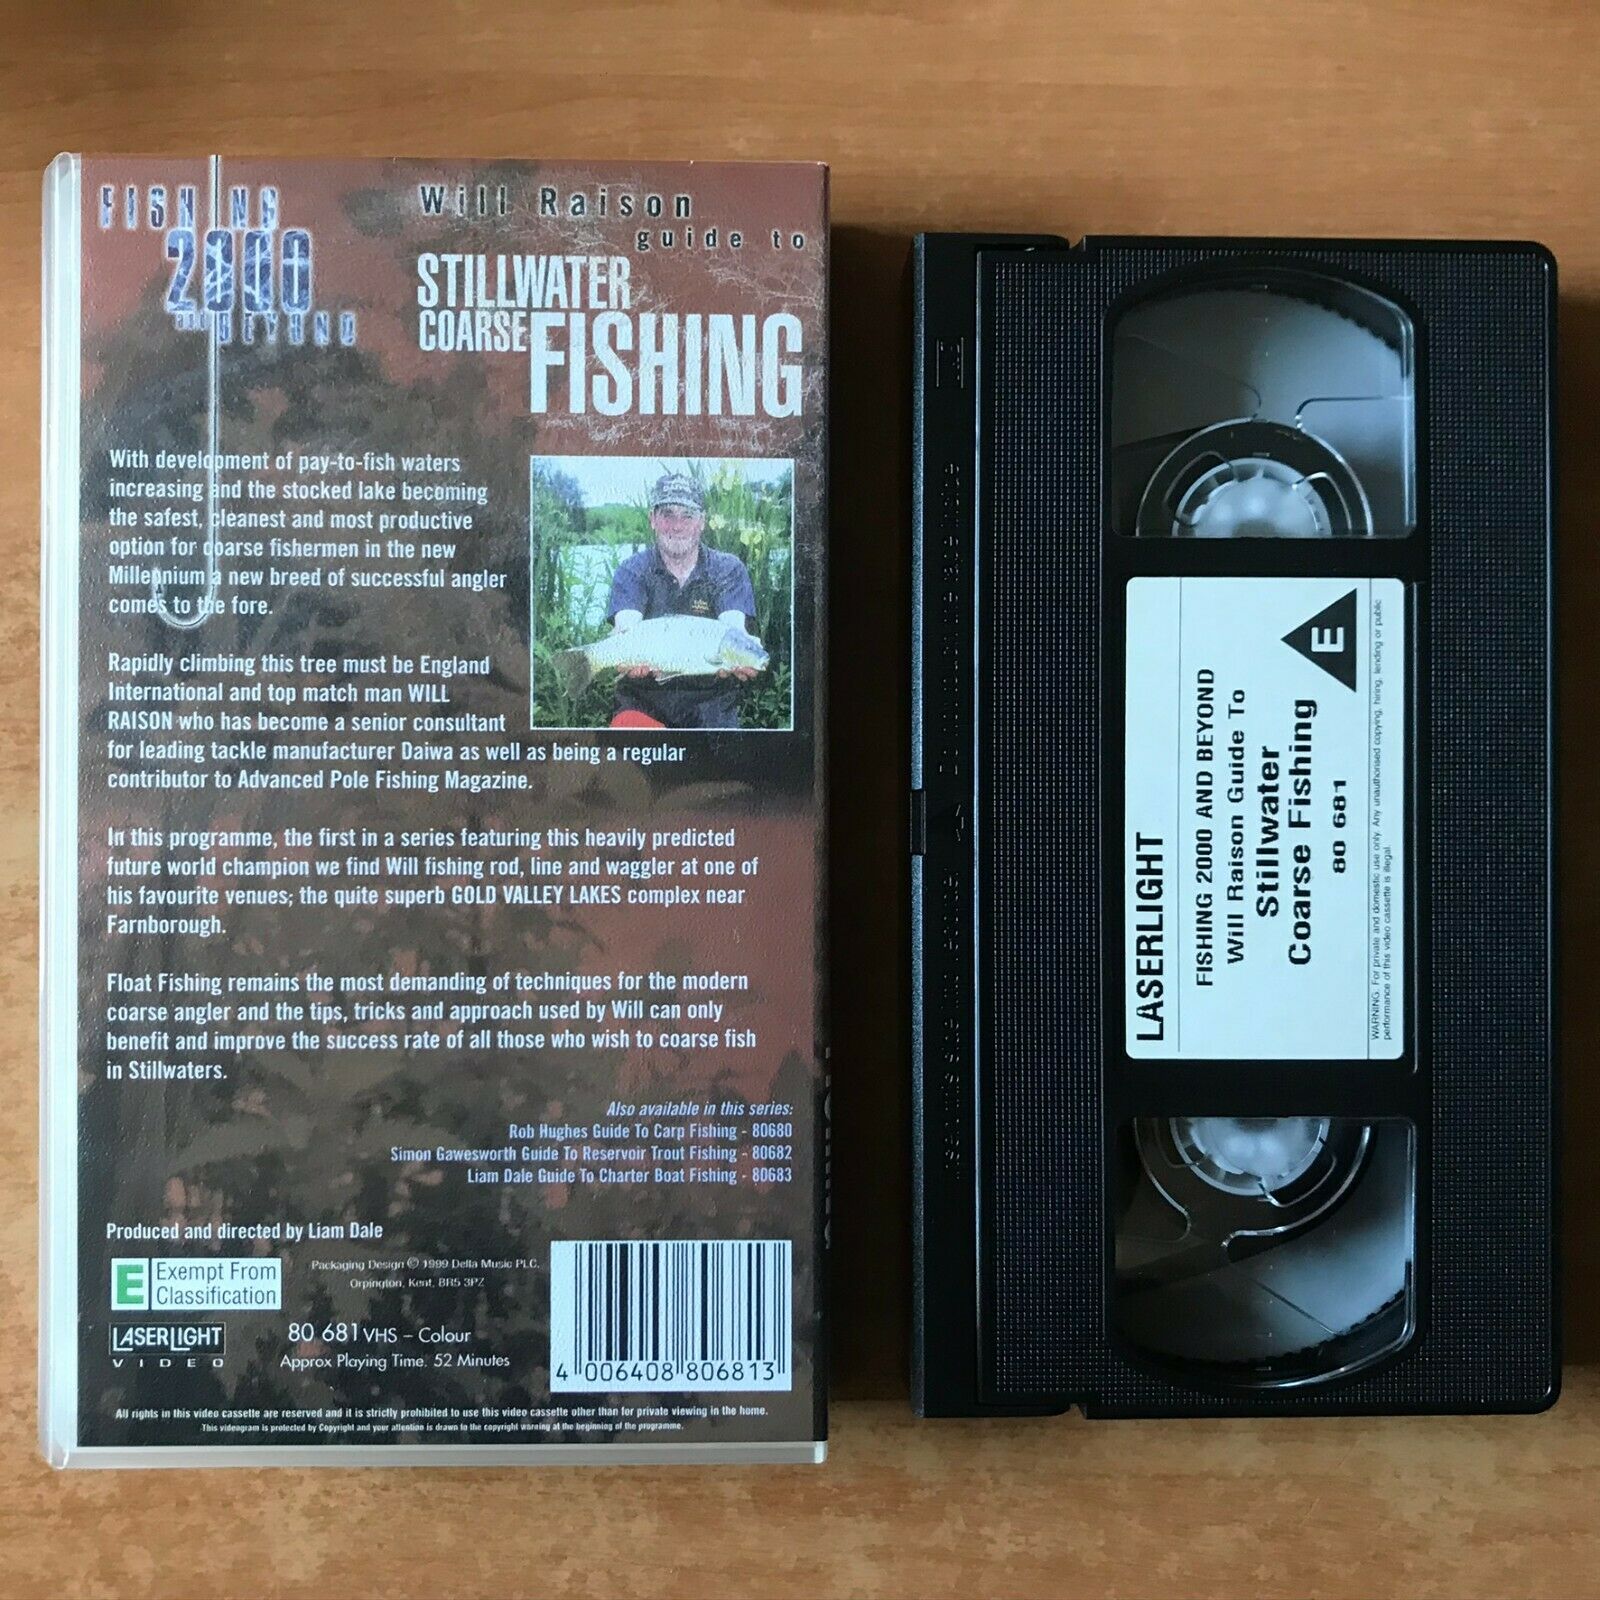 Stillwater Coarse Fishing; [Will Raison] Guide - Gold Valley Lakes - Pal VHS-